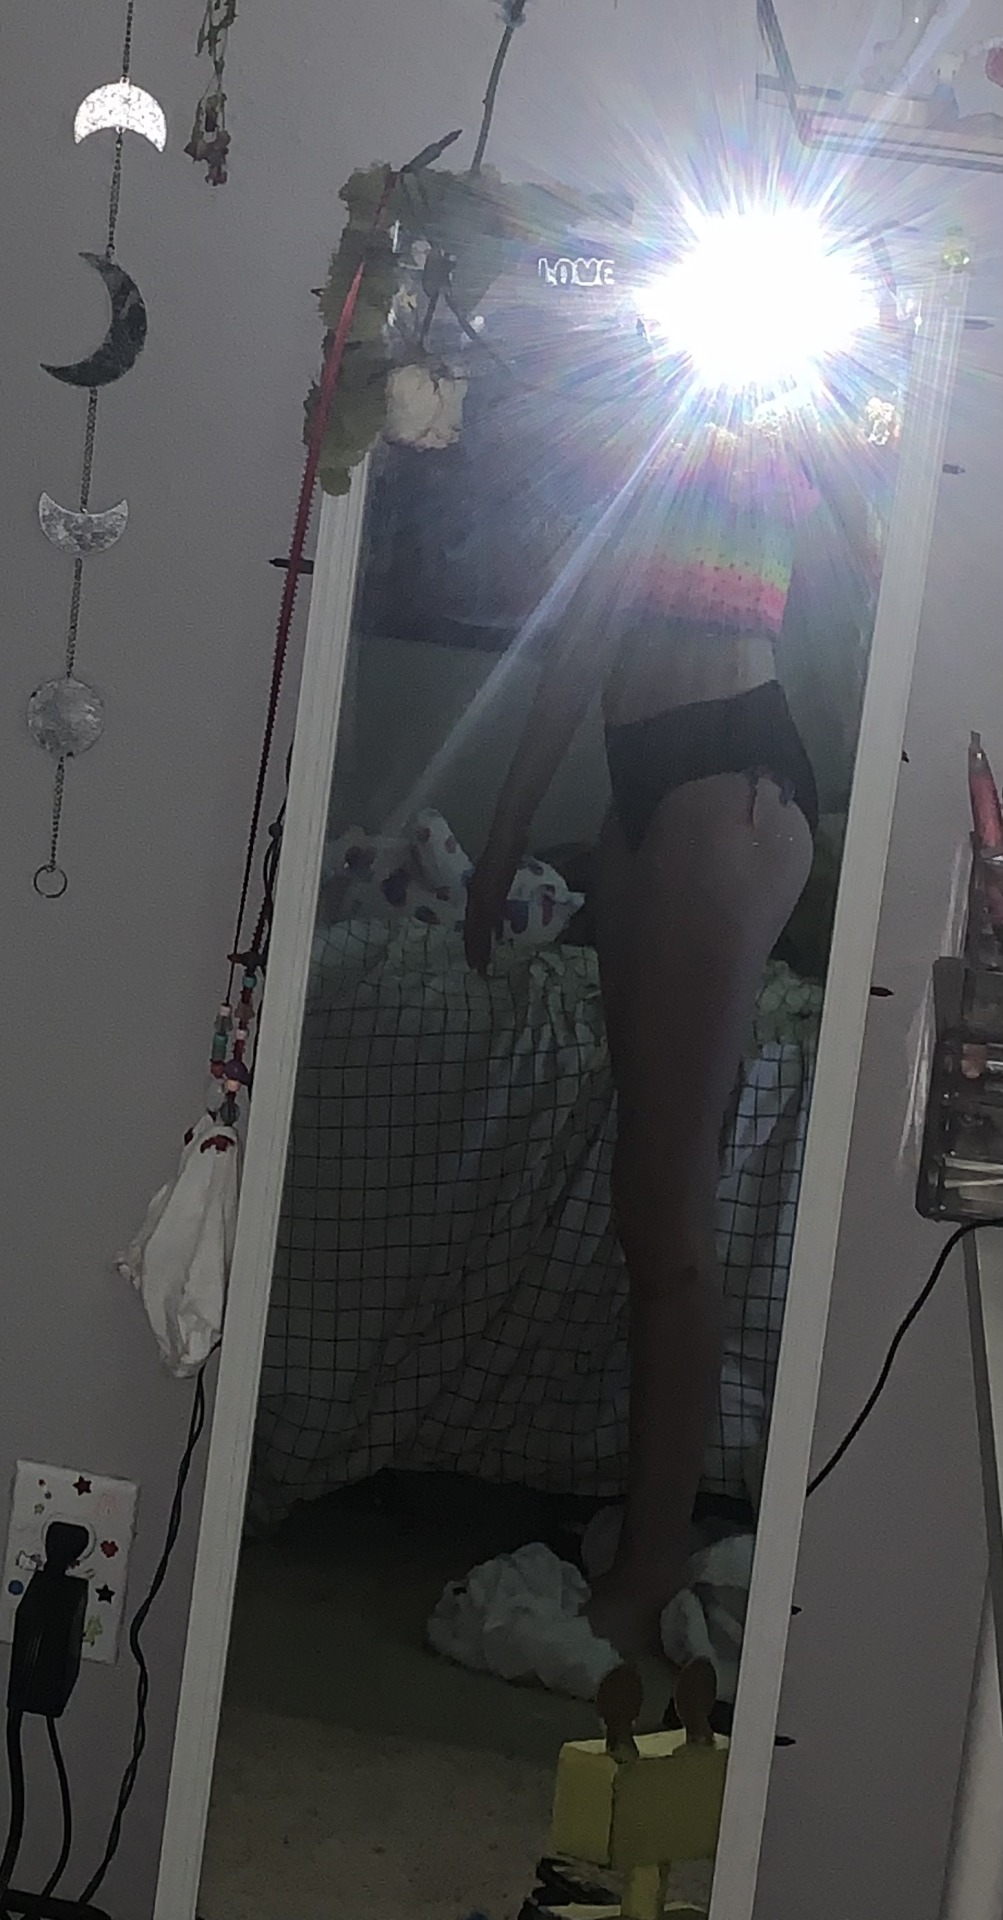 Hate my body I’m so ugly give me meanspo. #thinspo#fatspo#fatso#ugly#anamia#4n4 thoughts#lolita